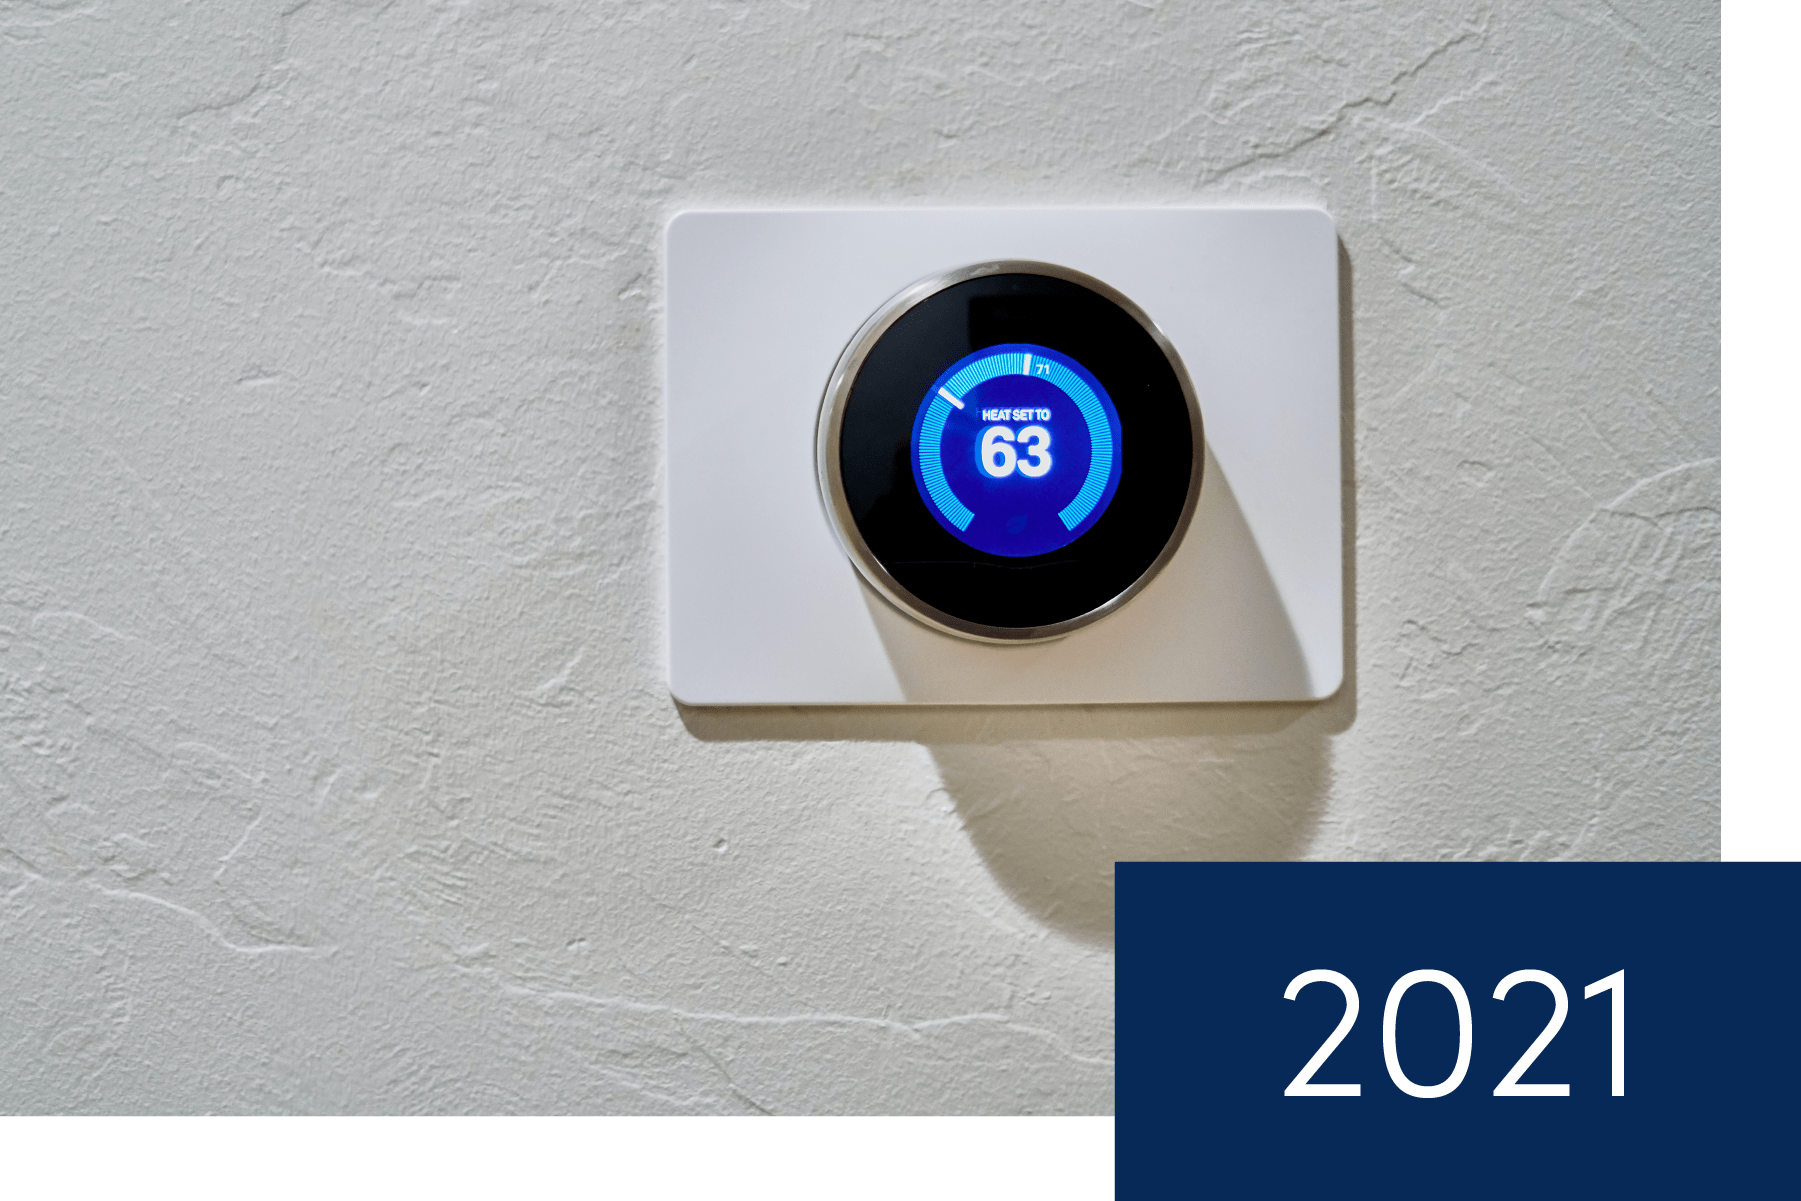 IoT smart thermostat on wall